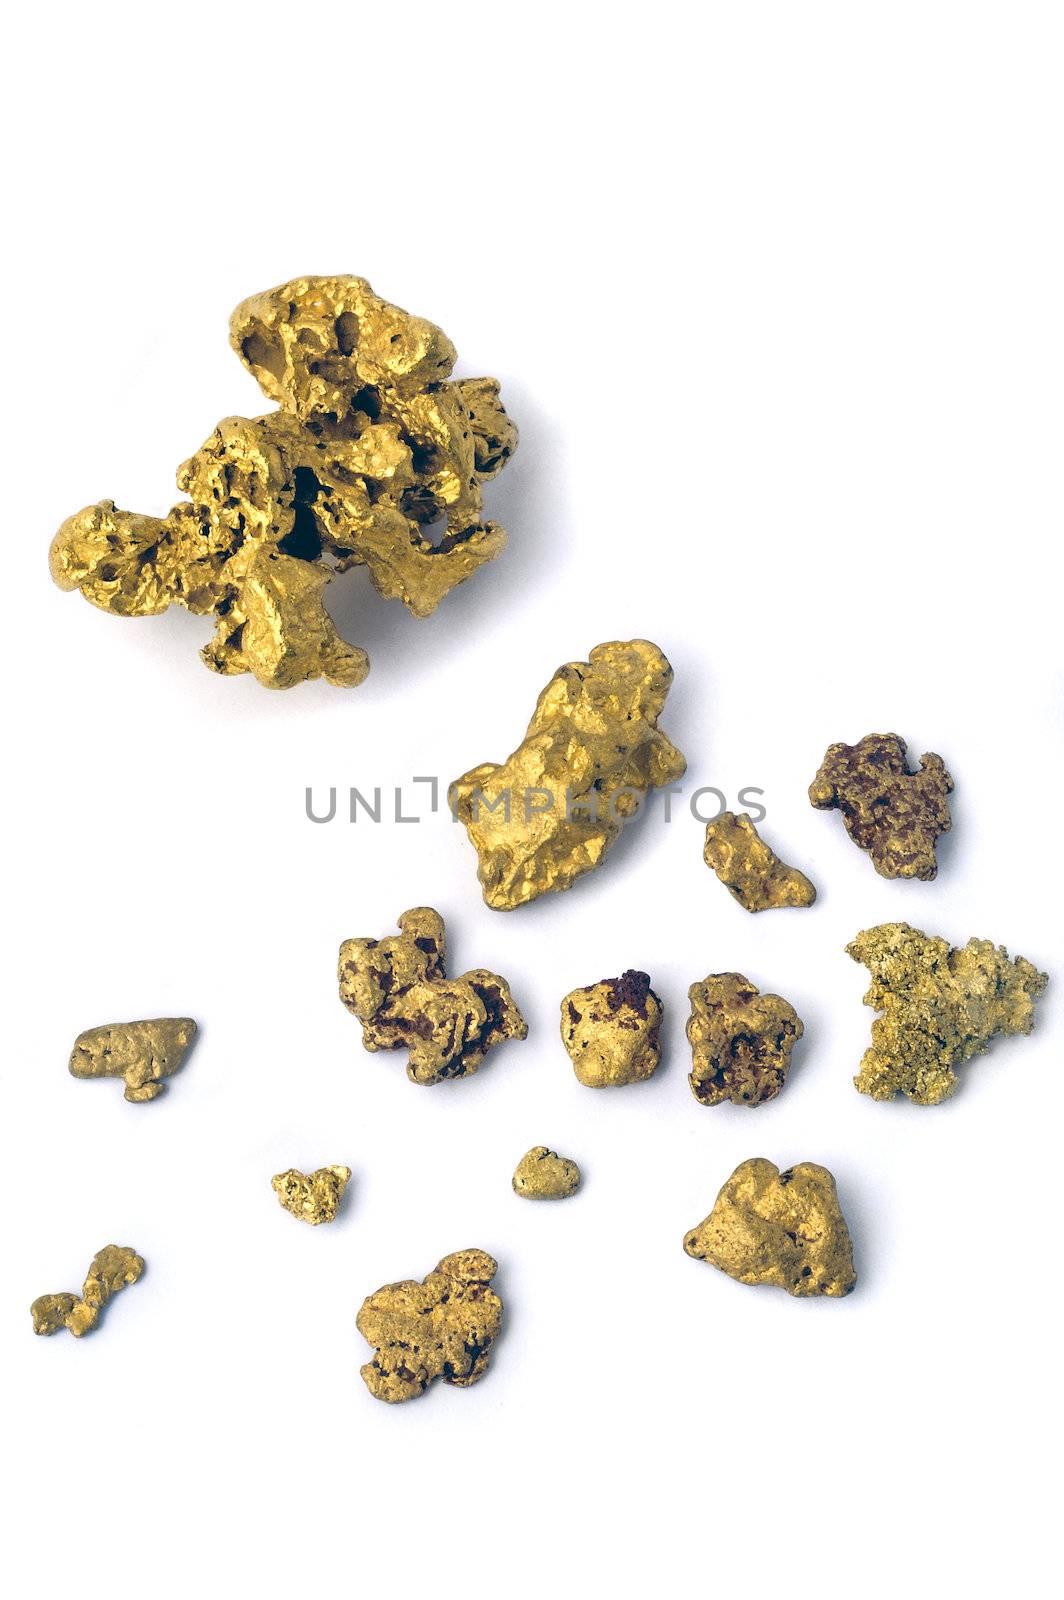 gold nugget by gillespaire